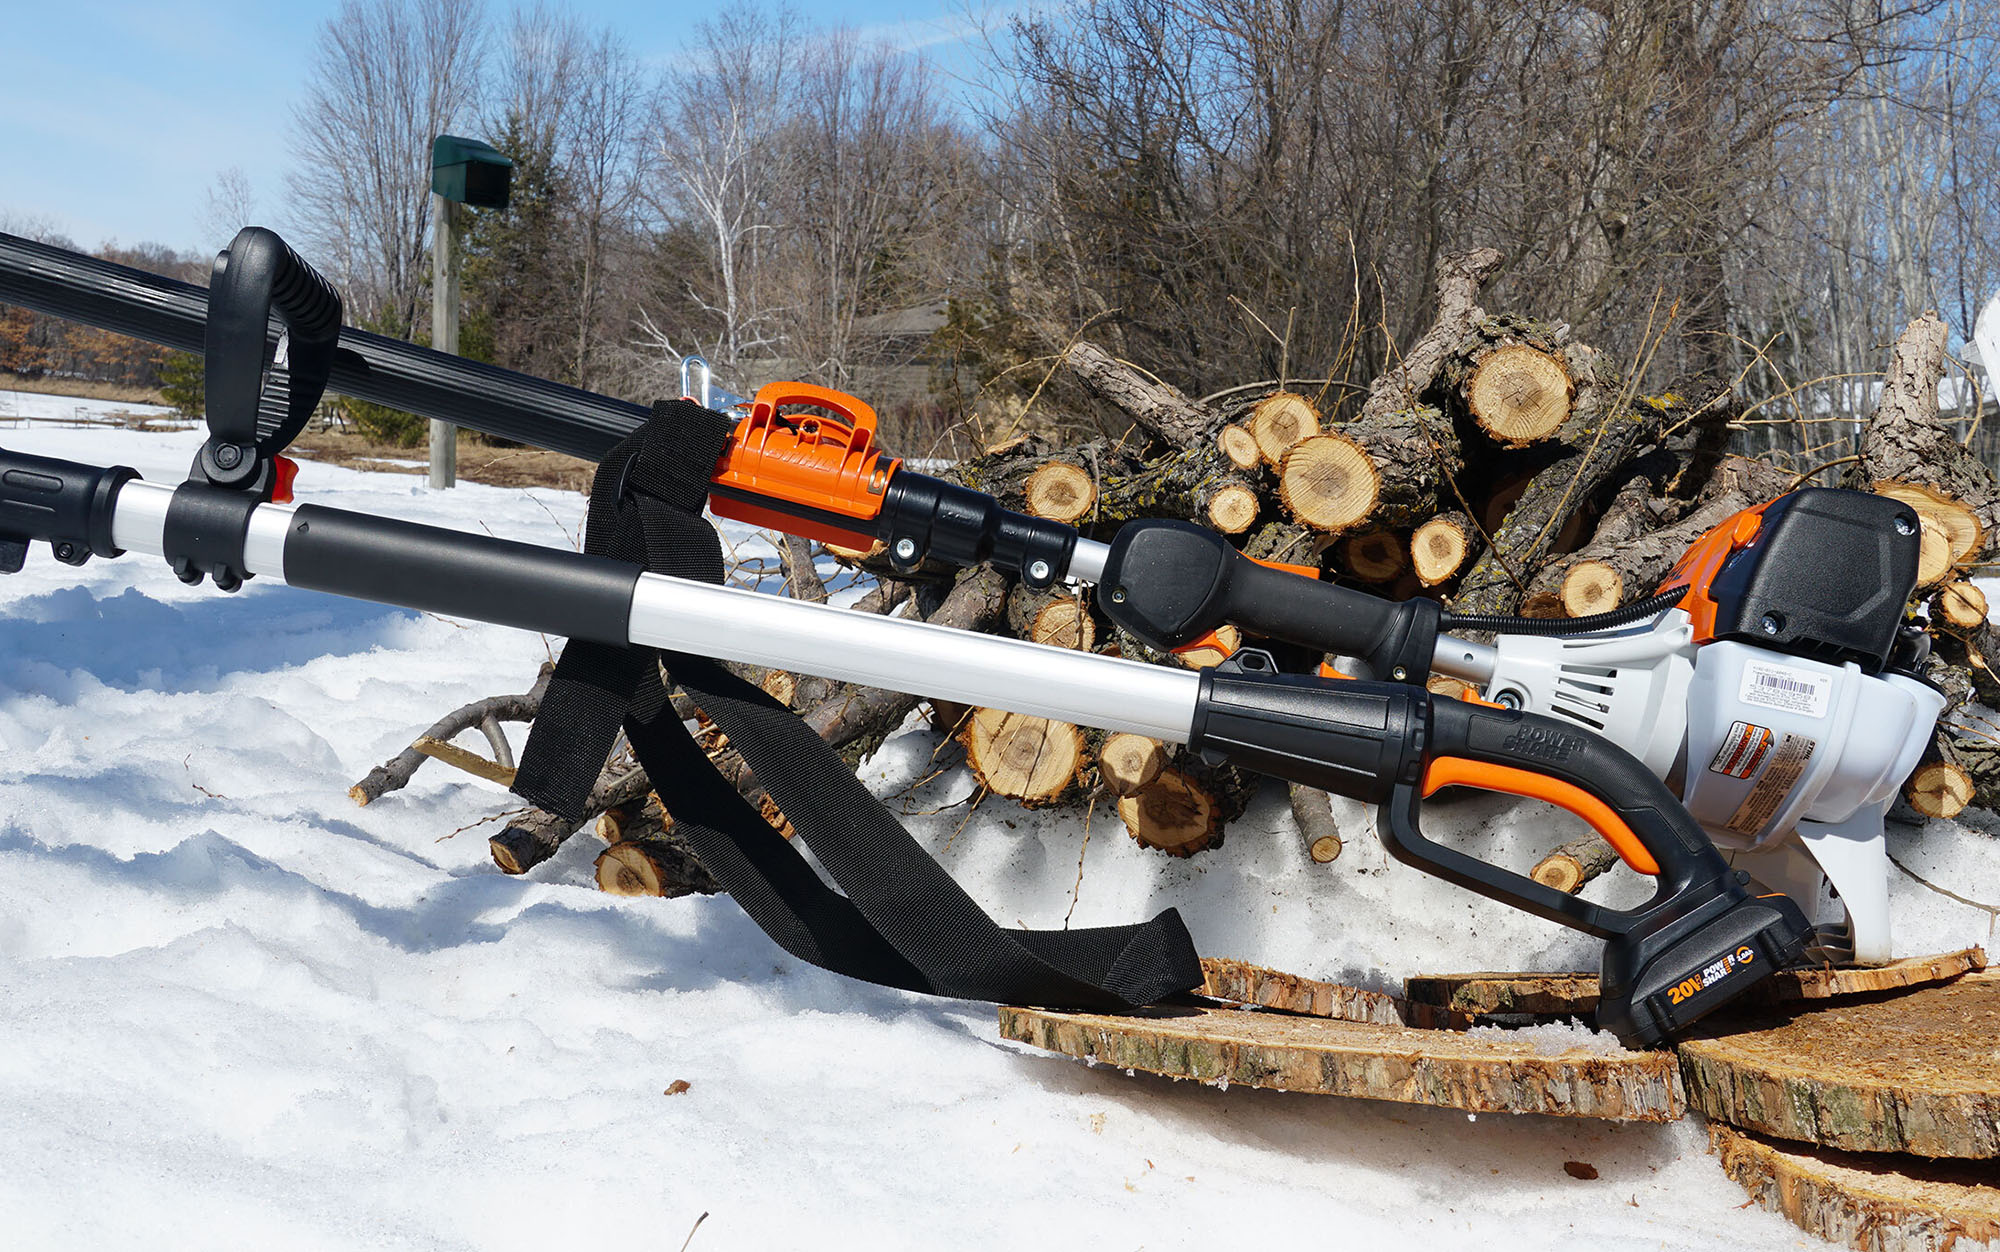 https://www.outdoorlife.com/wp-content/uploads/2023/03/30/testing-the-best-pole-saws.jpg